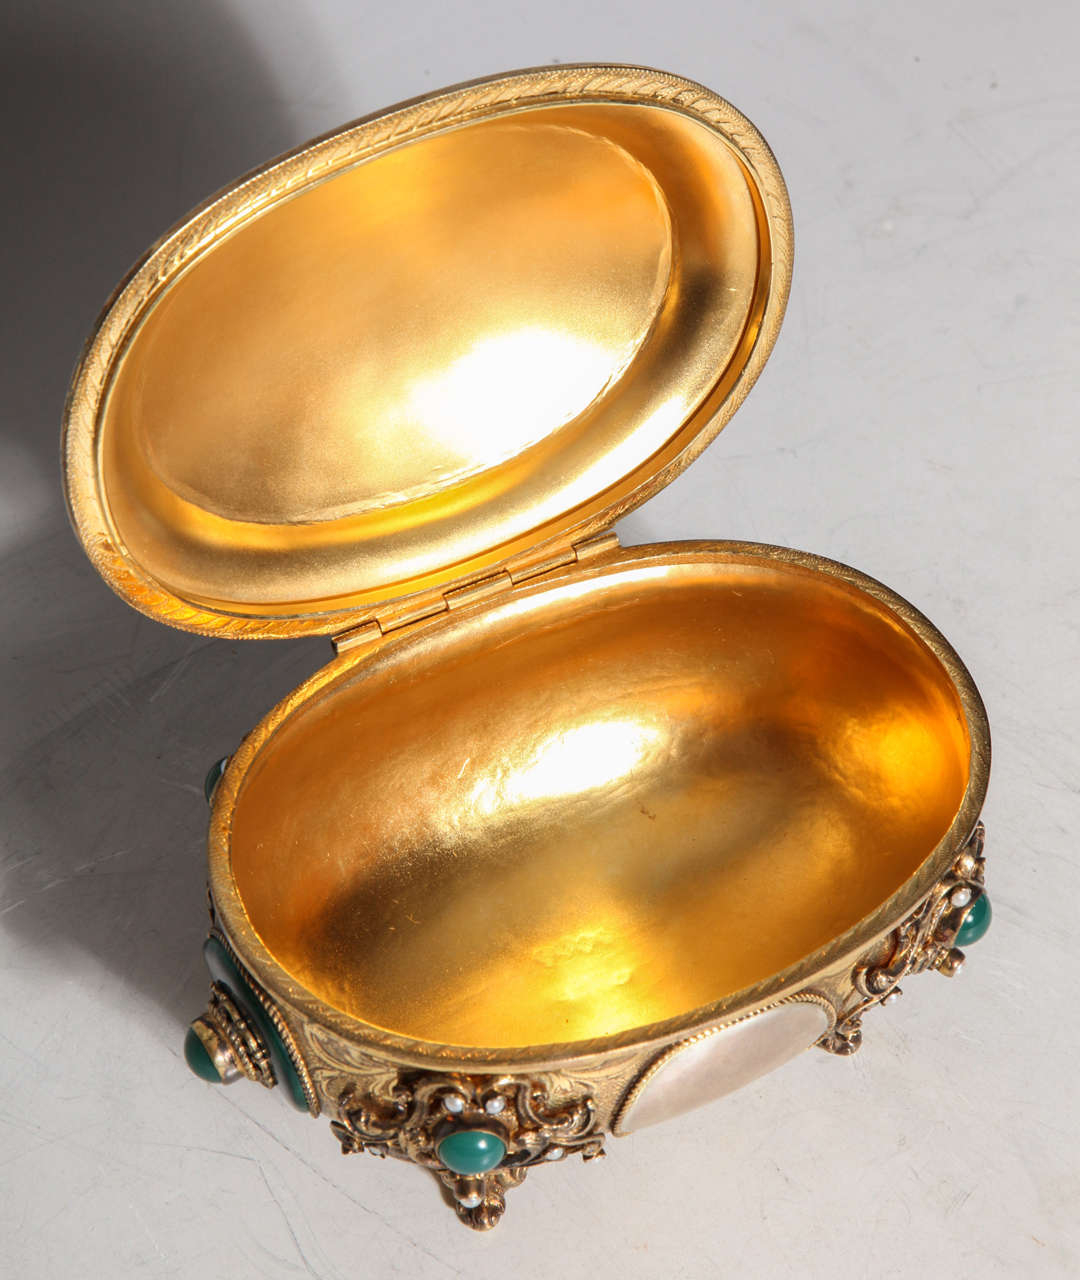 Viennese Judaica Silver Etrog Box, Jeweled with Pearls and Possibly Jade 1